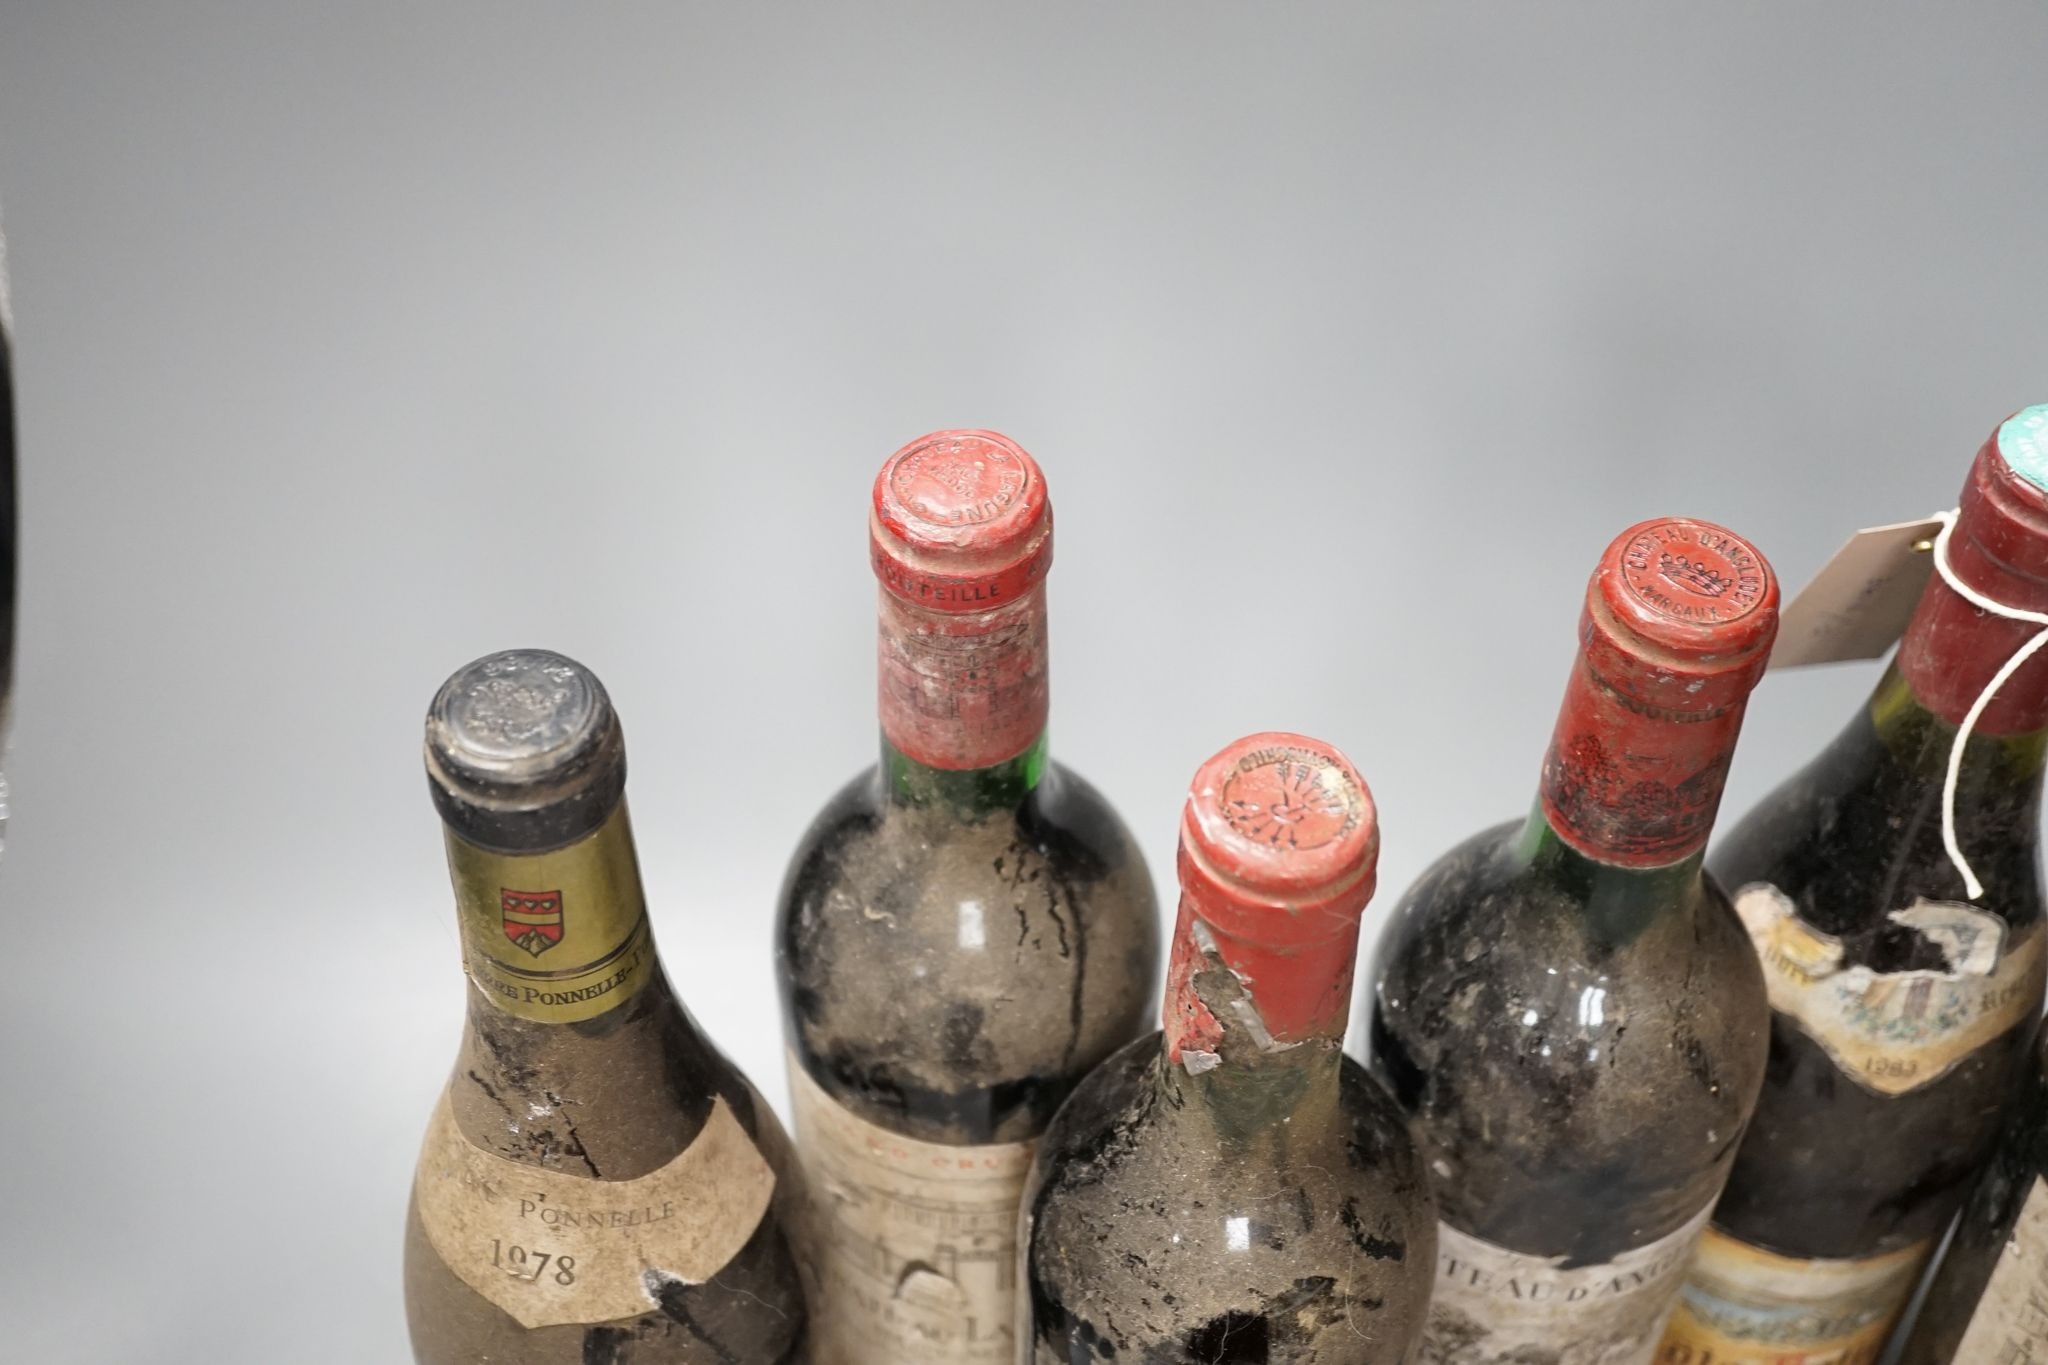 Six various bottles of red wine including two bottles of Château La Lagune 1976 etc.